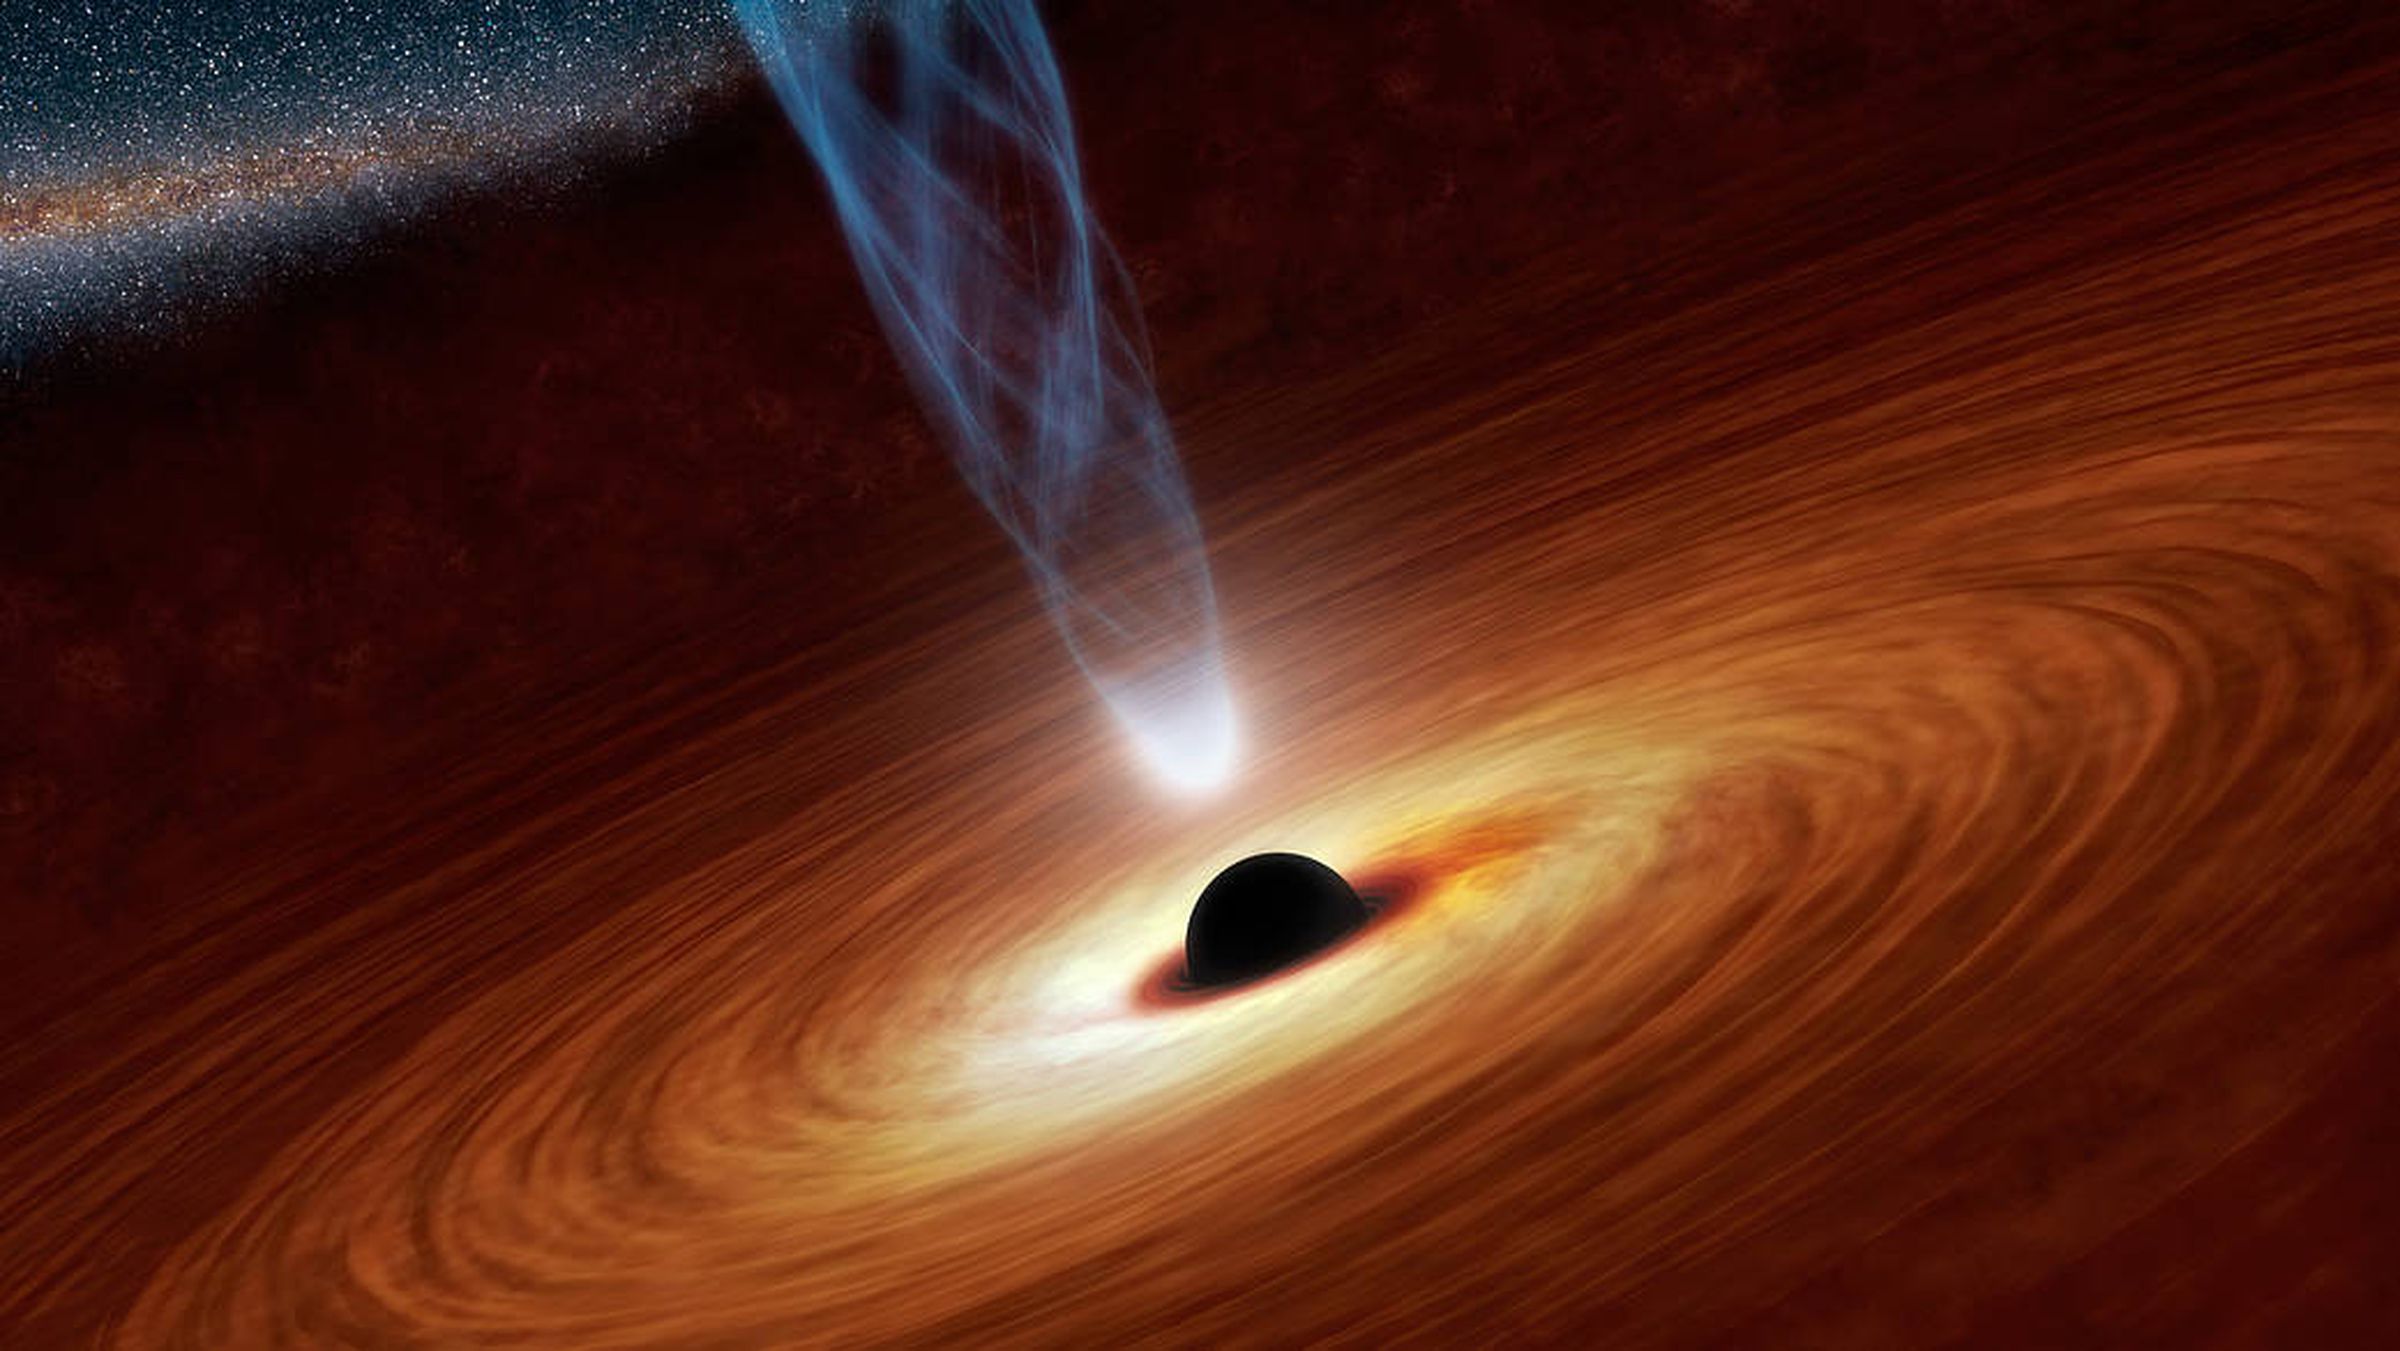 An artist’s impression of a supermassive black hole. The spiraling orange matter represents an accretion disc, while the column in the center shows a jet of charged plasma, like the one researchers have observed coming out of the black hole at the center of galaxy M87.